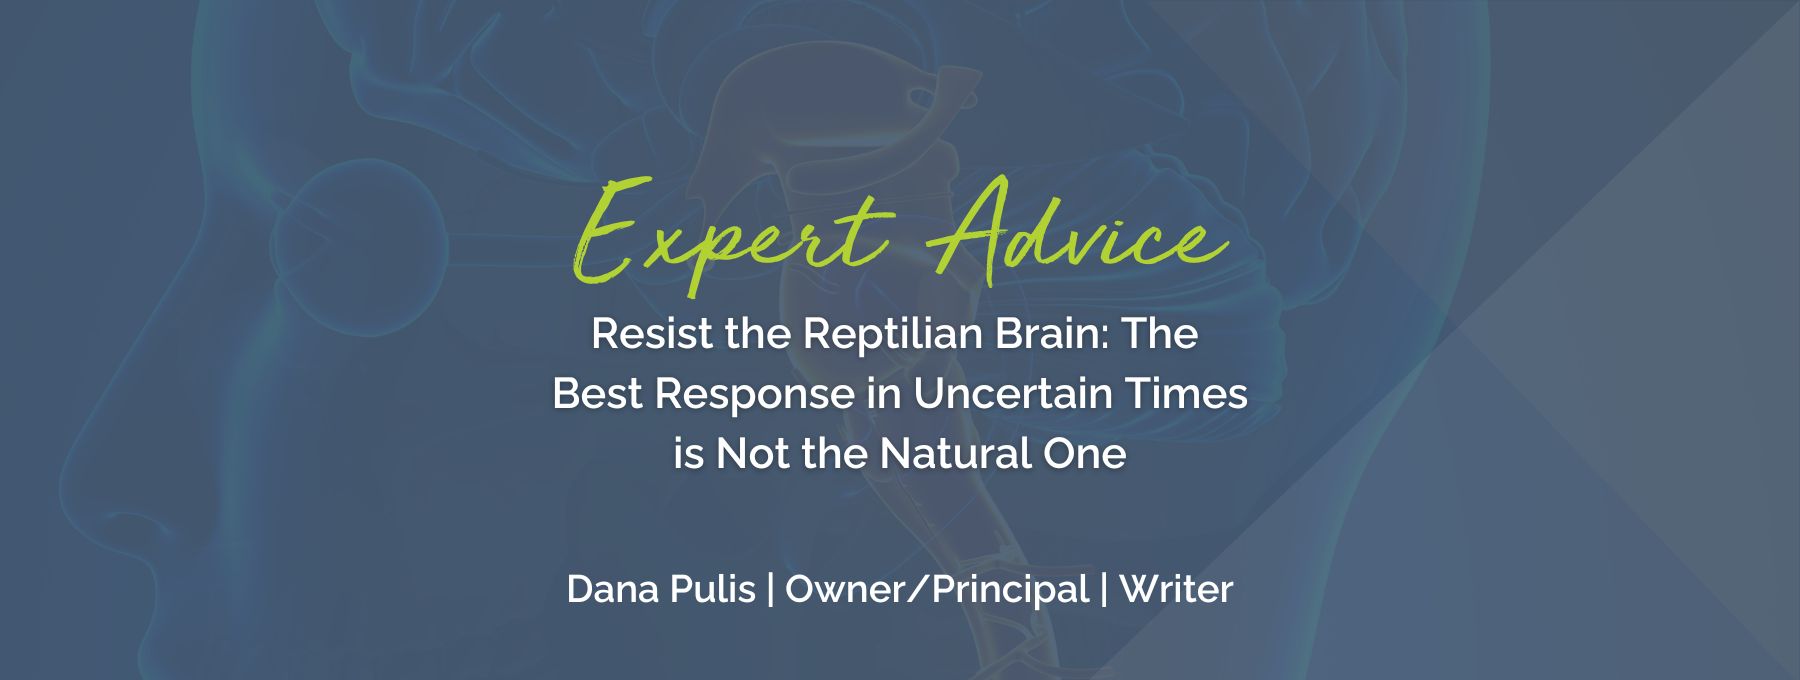 Expert Advise: Resist the Reptilian Brain - The Best Response in Uncertain Times is Not the Natural One